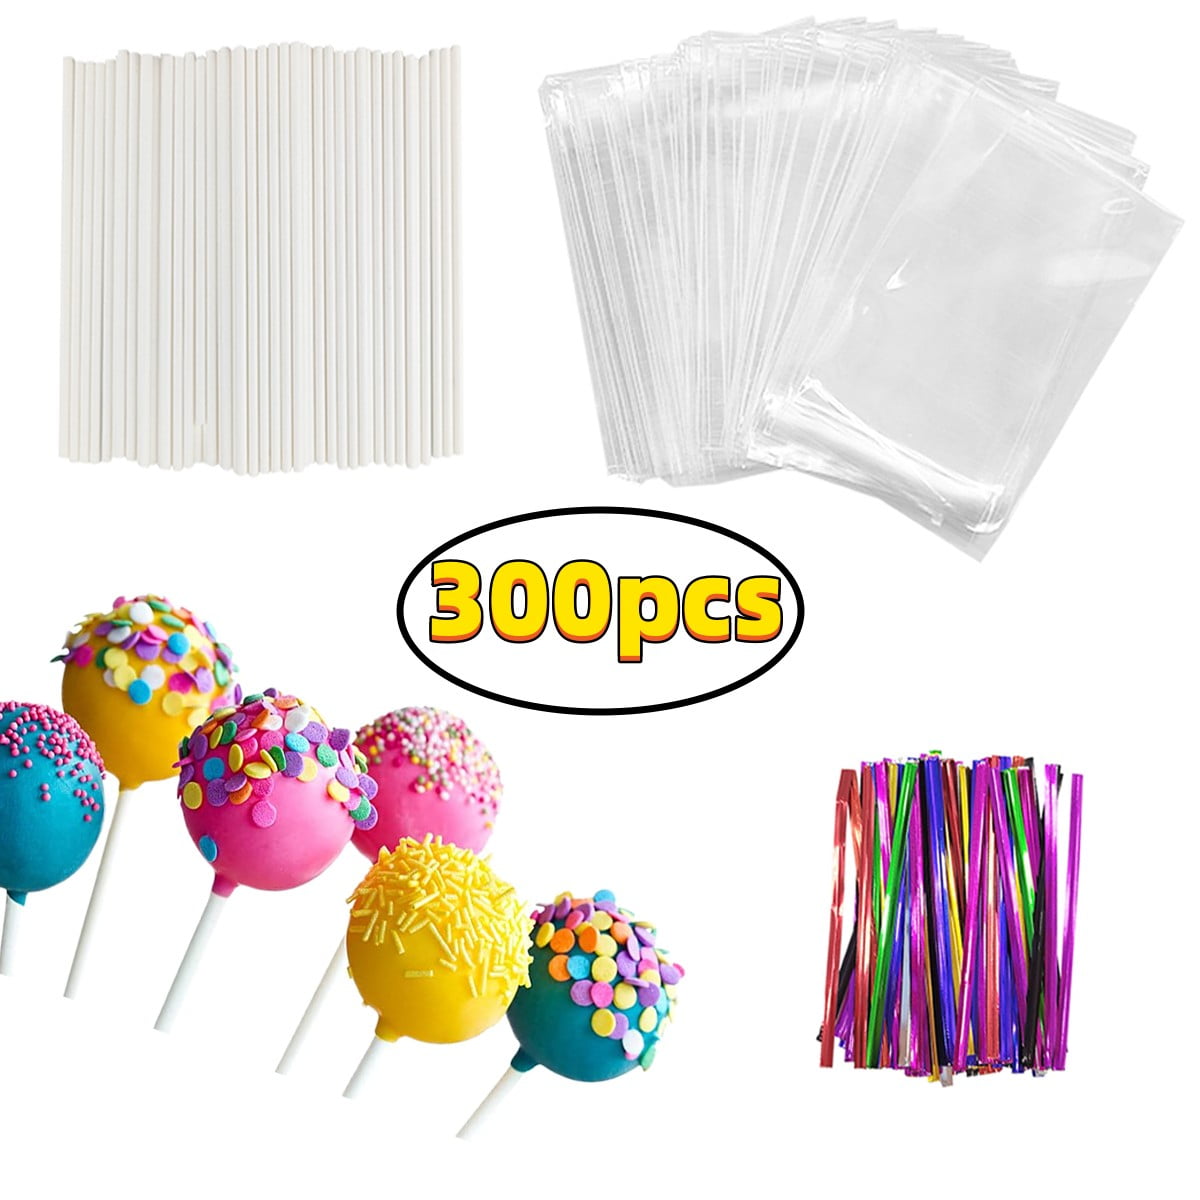 360Pcs 6inch Lollipop Sticks, Cake Pops pop Bags and Wrappers Chocolates  Cookies Set Including 120 Parcel Bags, Papery Treat Colorful Metallic Twist  Ties - Yahoo Shopping